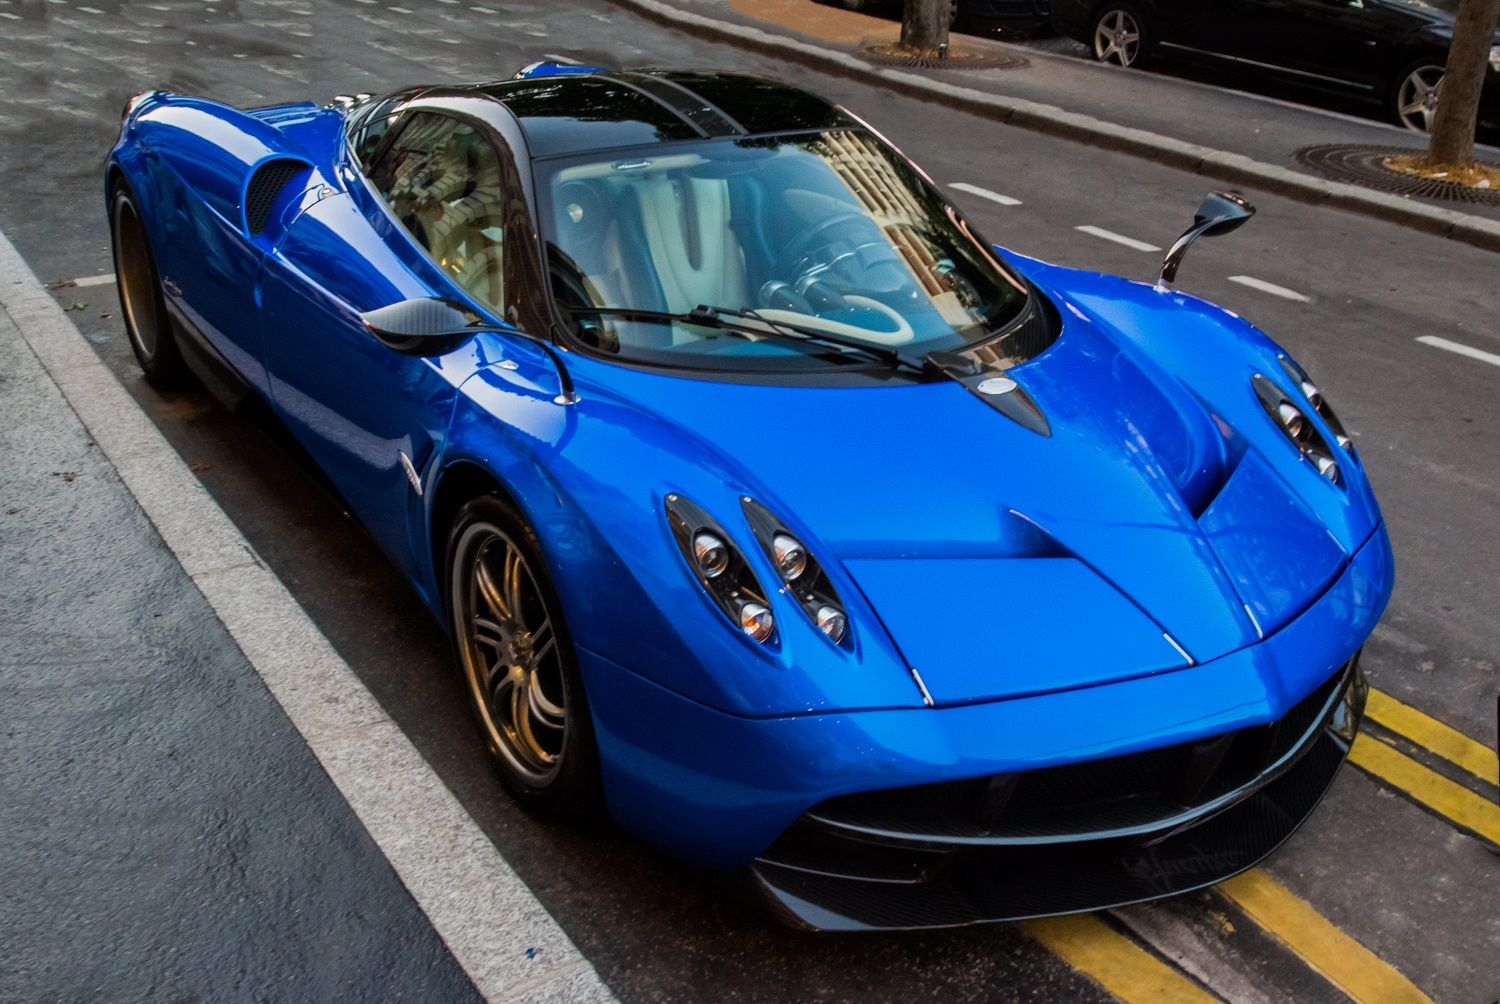 These Are the Magnificent Cars World's Billionaires Own